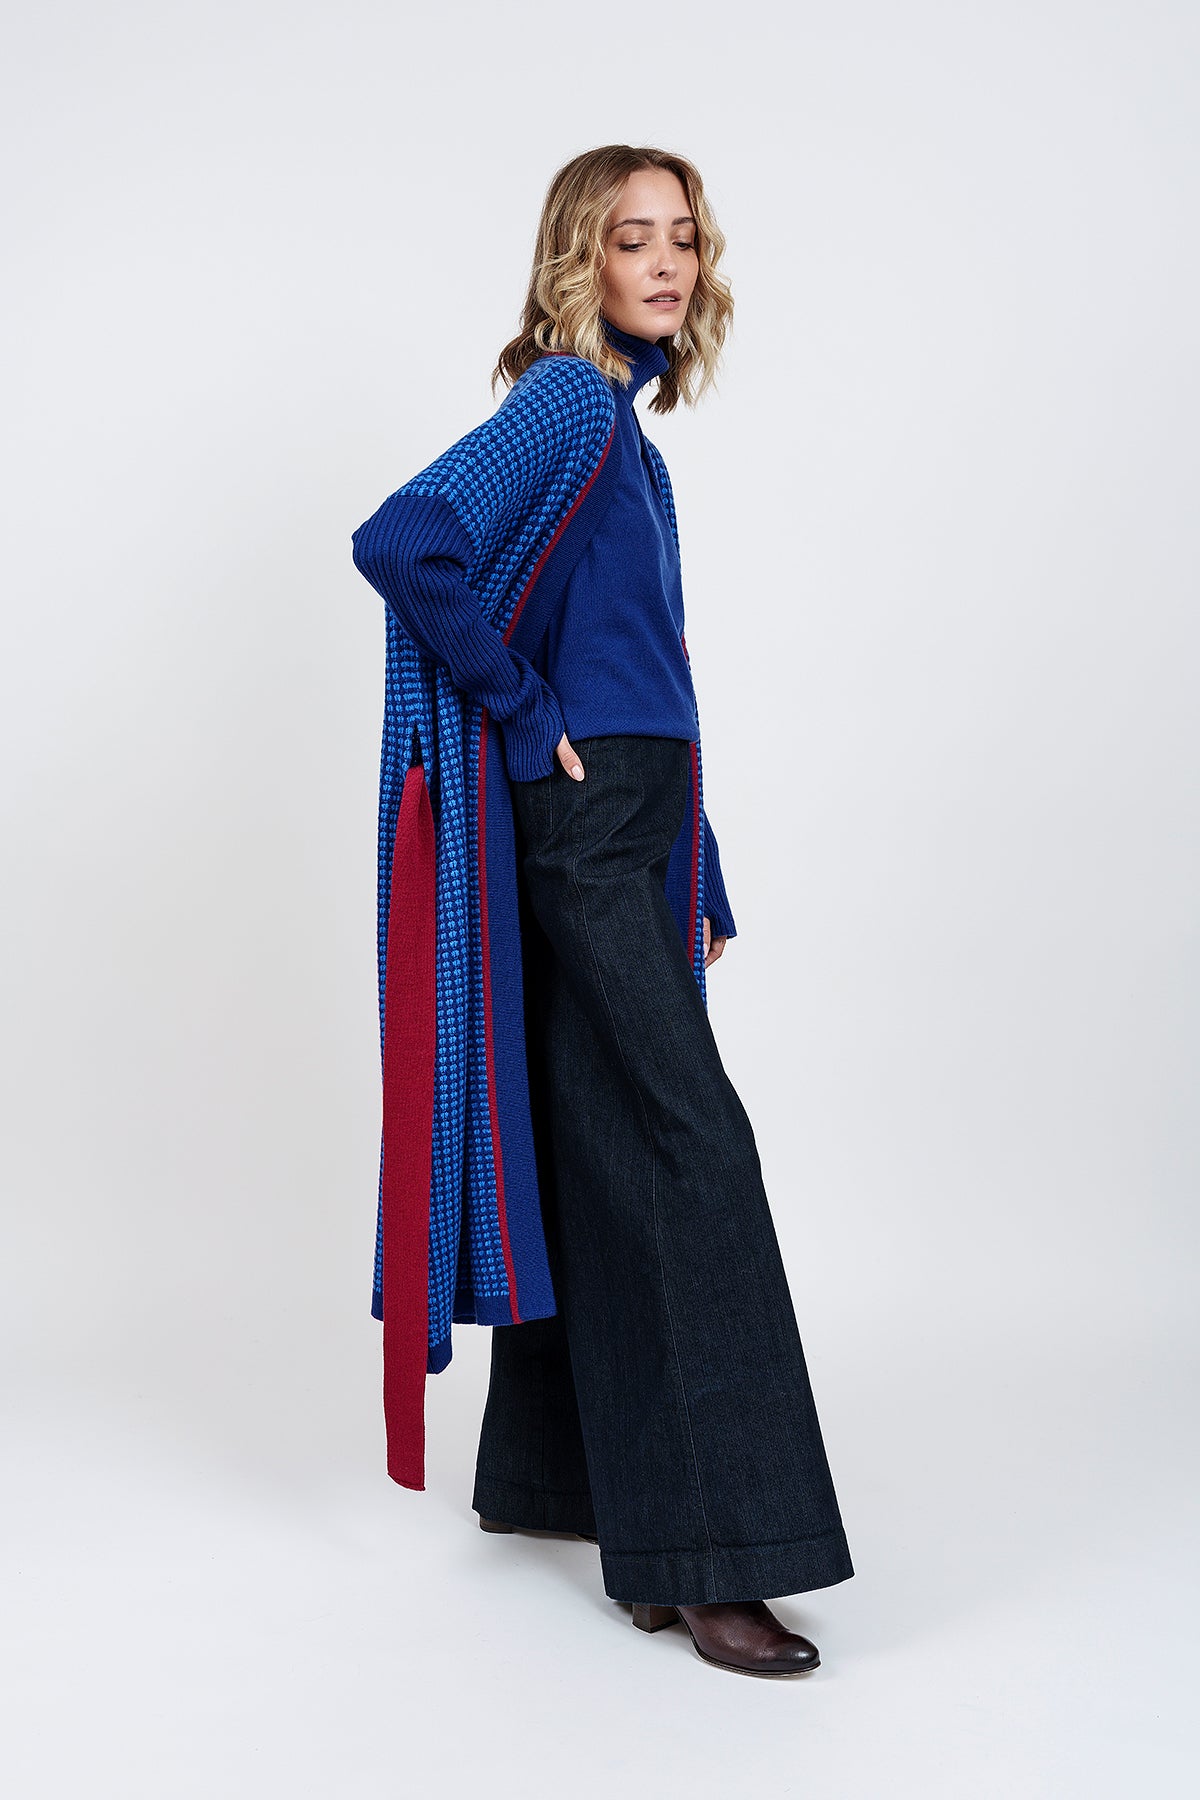 WOOL AND CASHMERE COAT in blue, blue and burgundy